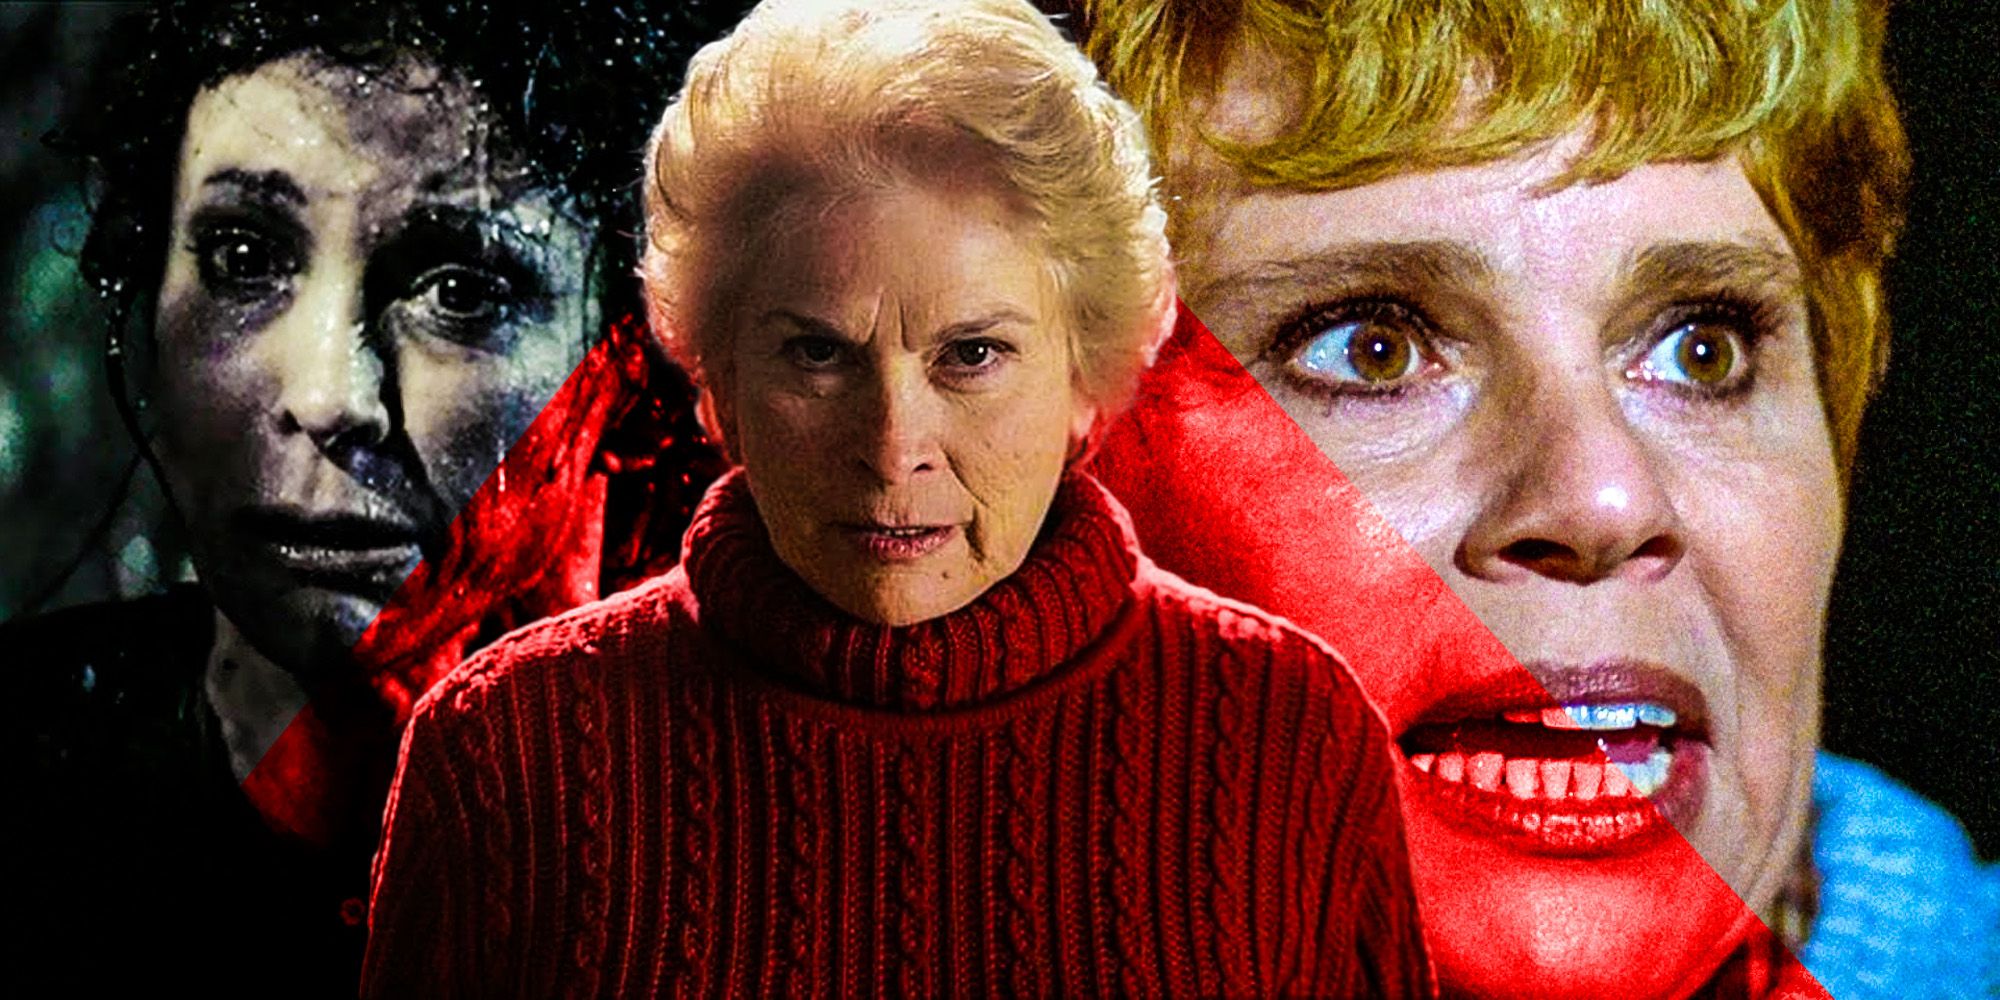 Jason X’s Planned Pamela Voorhees Scene Would Have Shown How Evil Jason Has Become